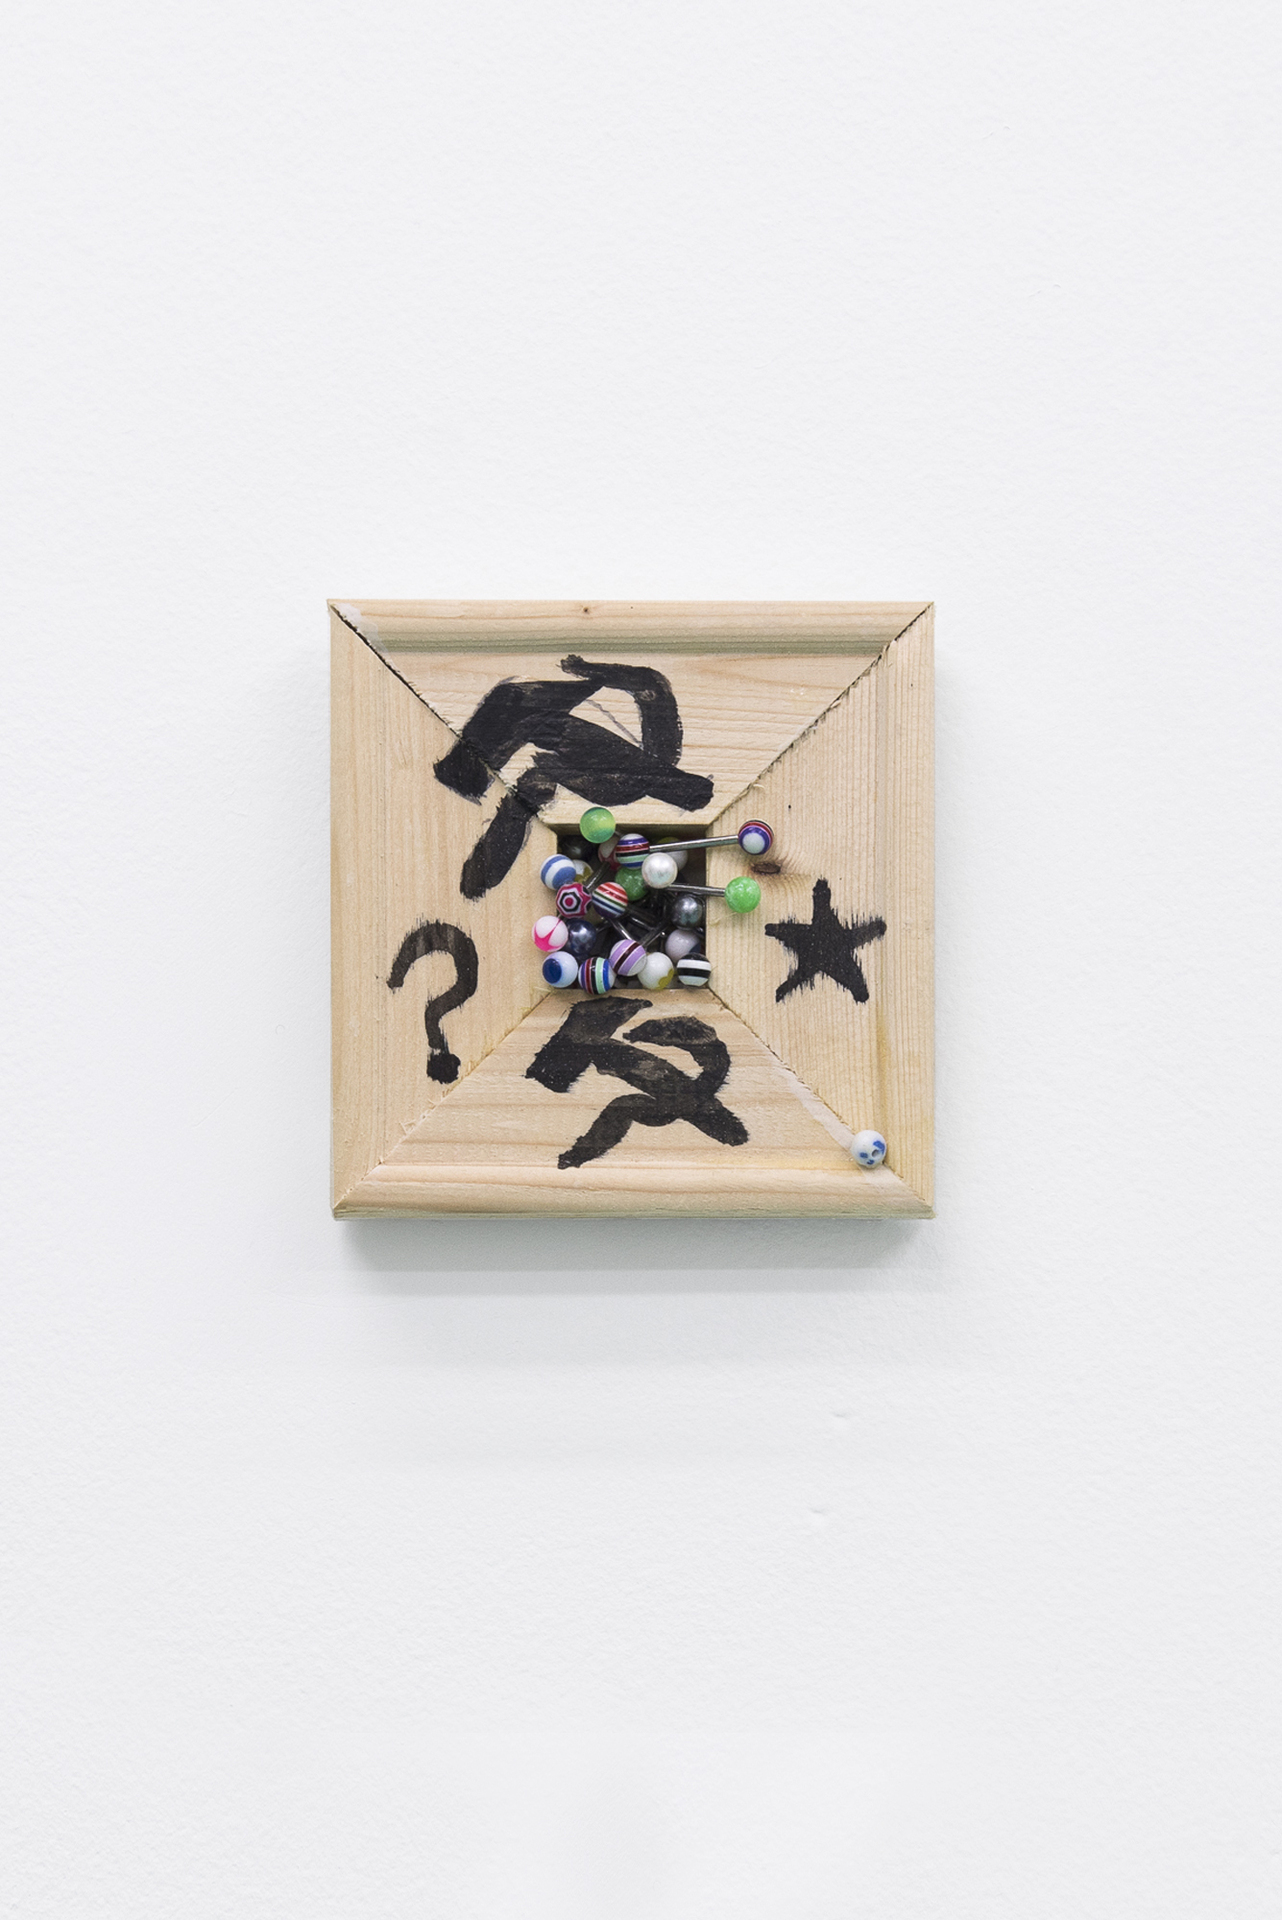 Victoria Todorov Title not known, 2019 Ink, wooden frame, tongue piercing barbells, glue